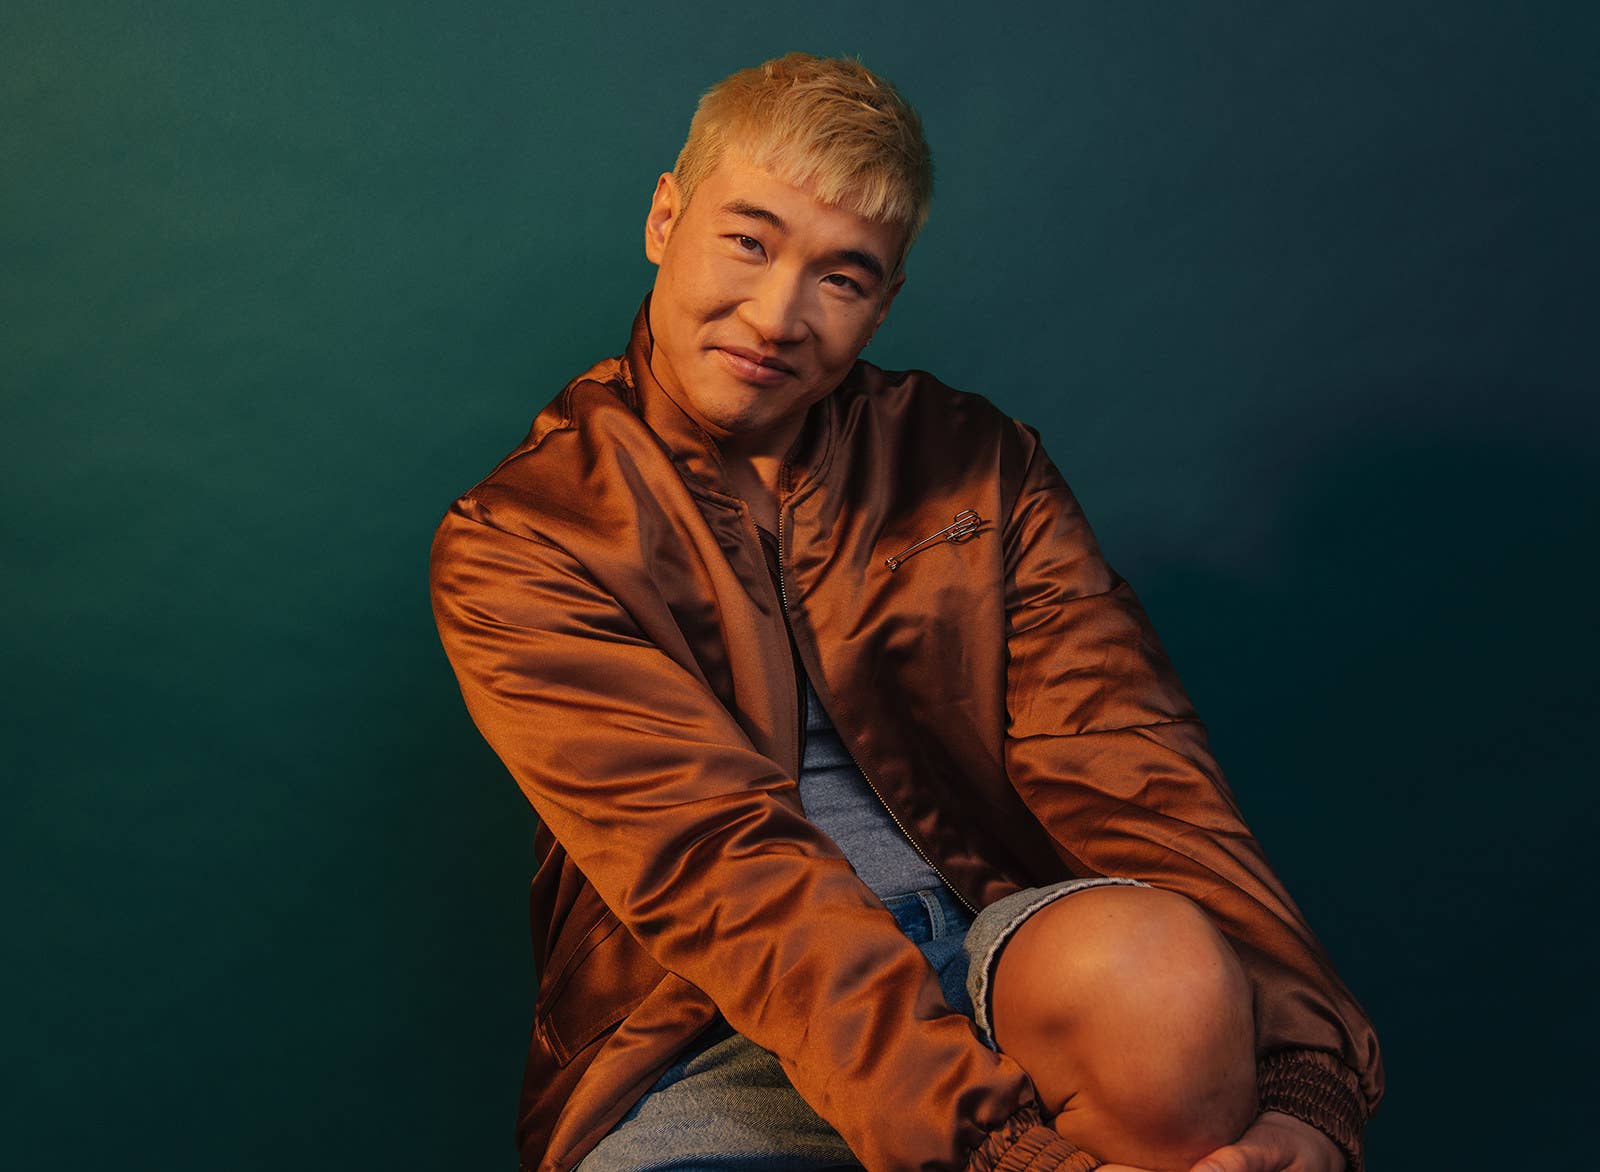 A man wearing a jacket and denim shorts sits in a photo studio for a portrait